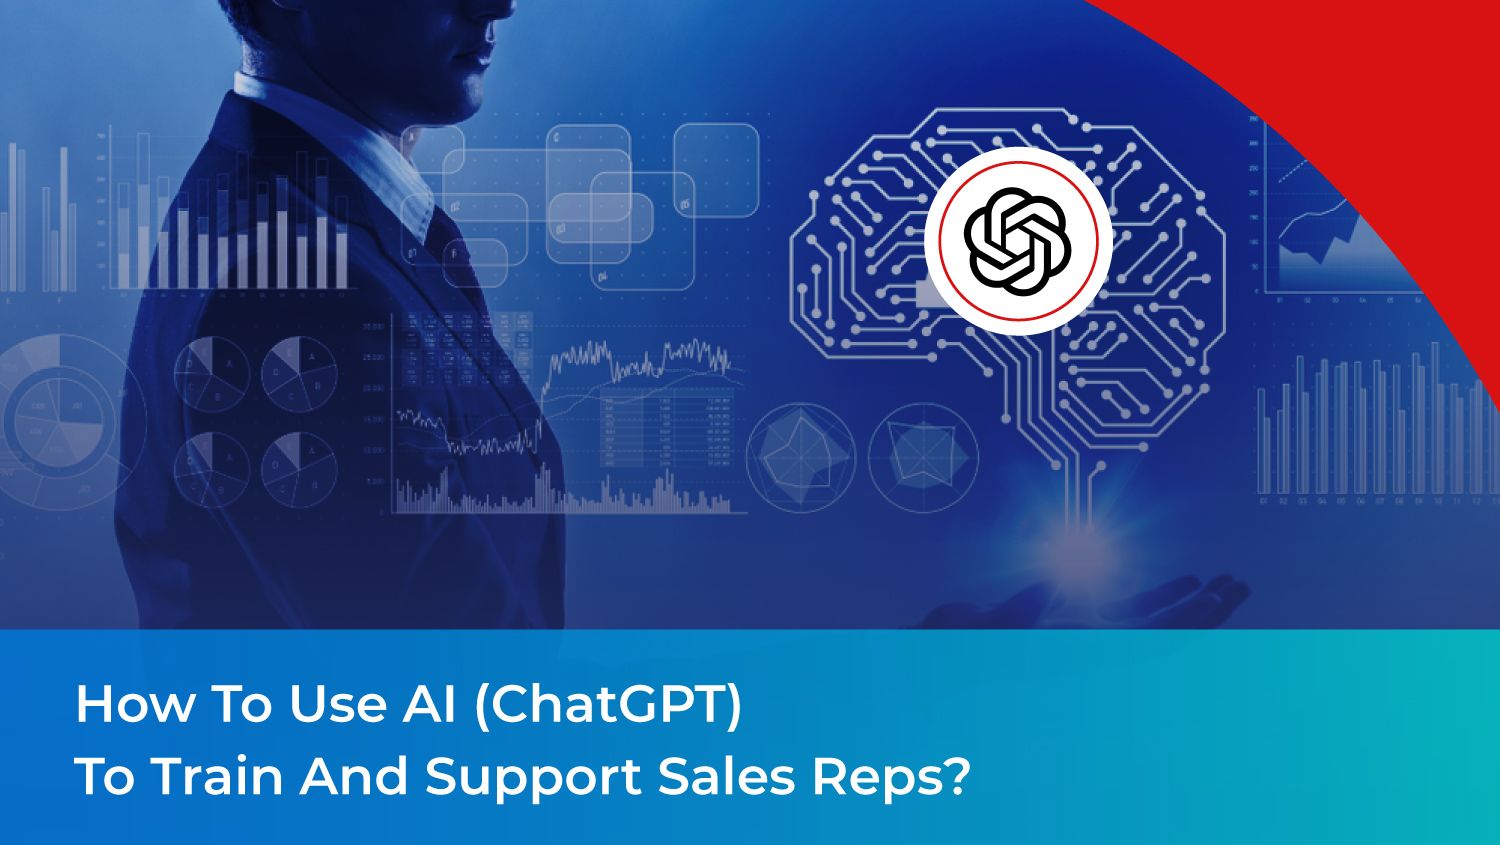 How to use AI (ChatGPT) to train and support sales reps?